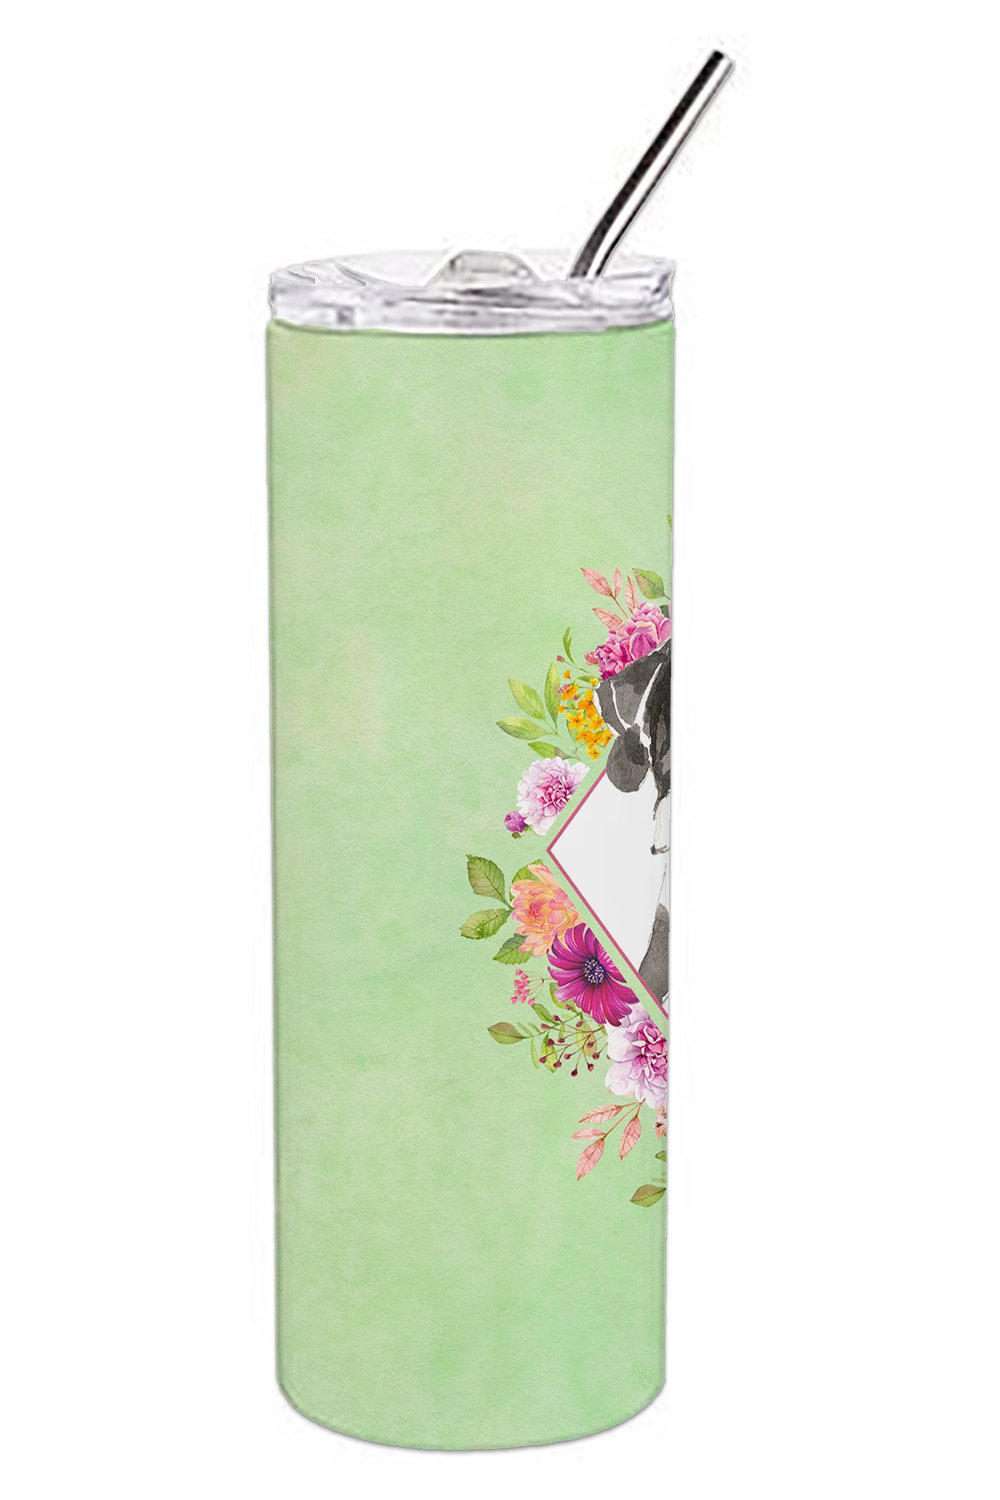 English Pointer Green Flowers Double Walled Stainless Steel 20 oz Skinny Tumbler CK4399TBL20 by Caroline's Treasures